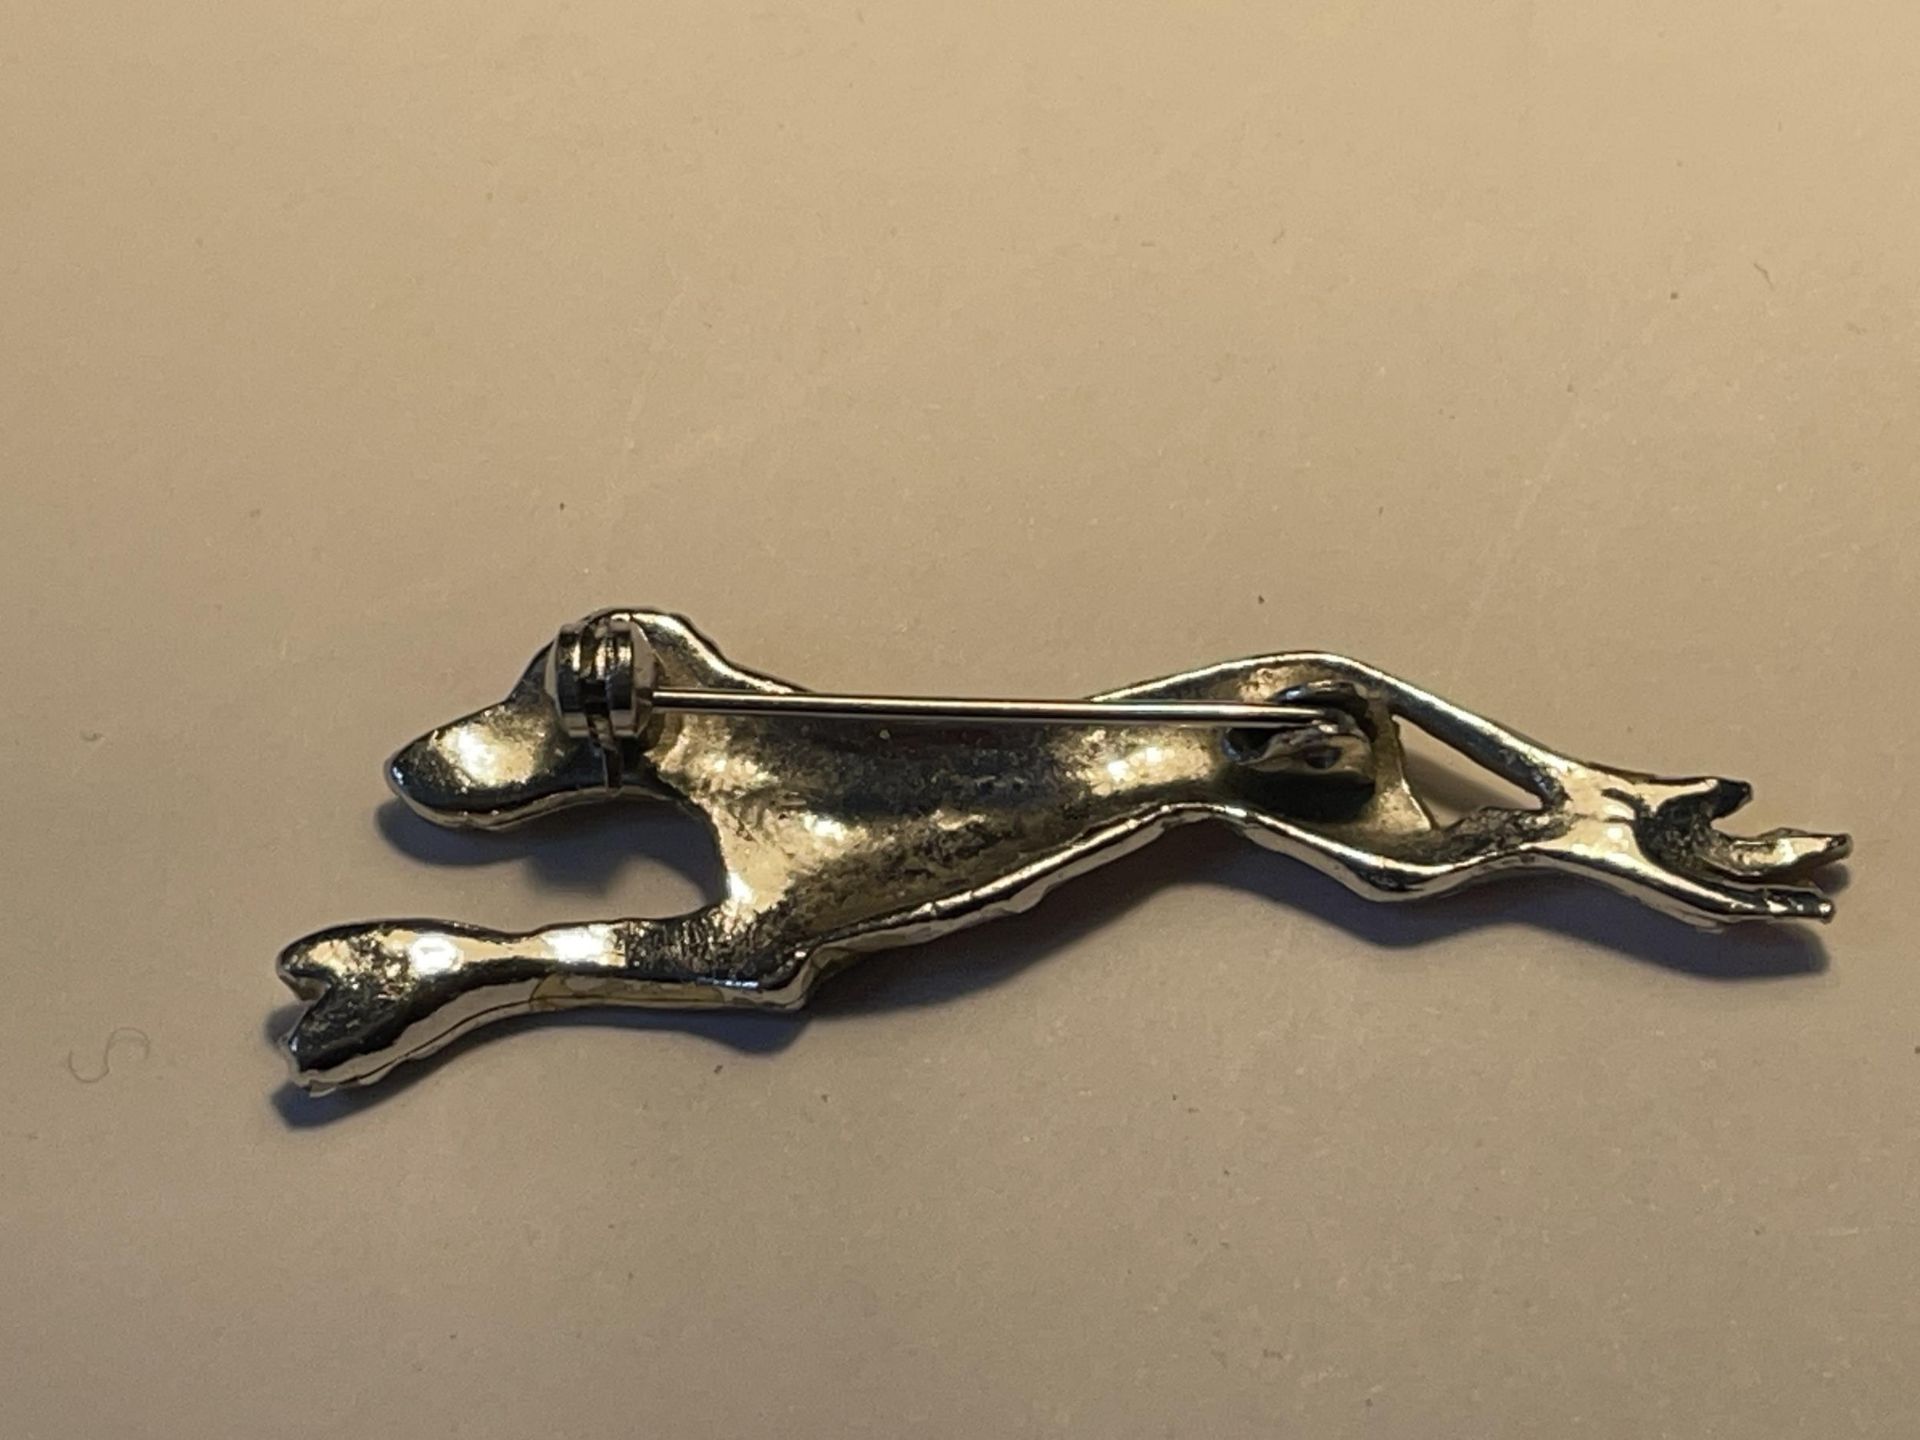 A VINTAGE ENAMELLED GREYHOUND BROOCH WITH A PRESENTATION BOX - Image 5 of 5